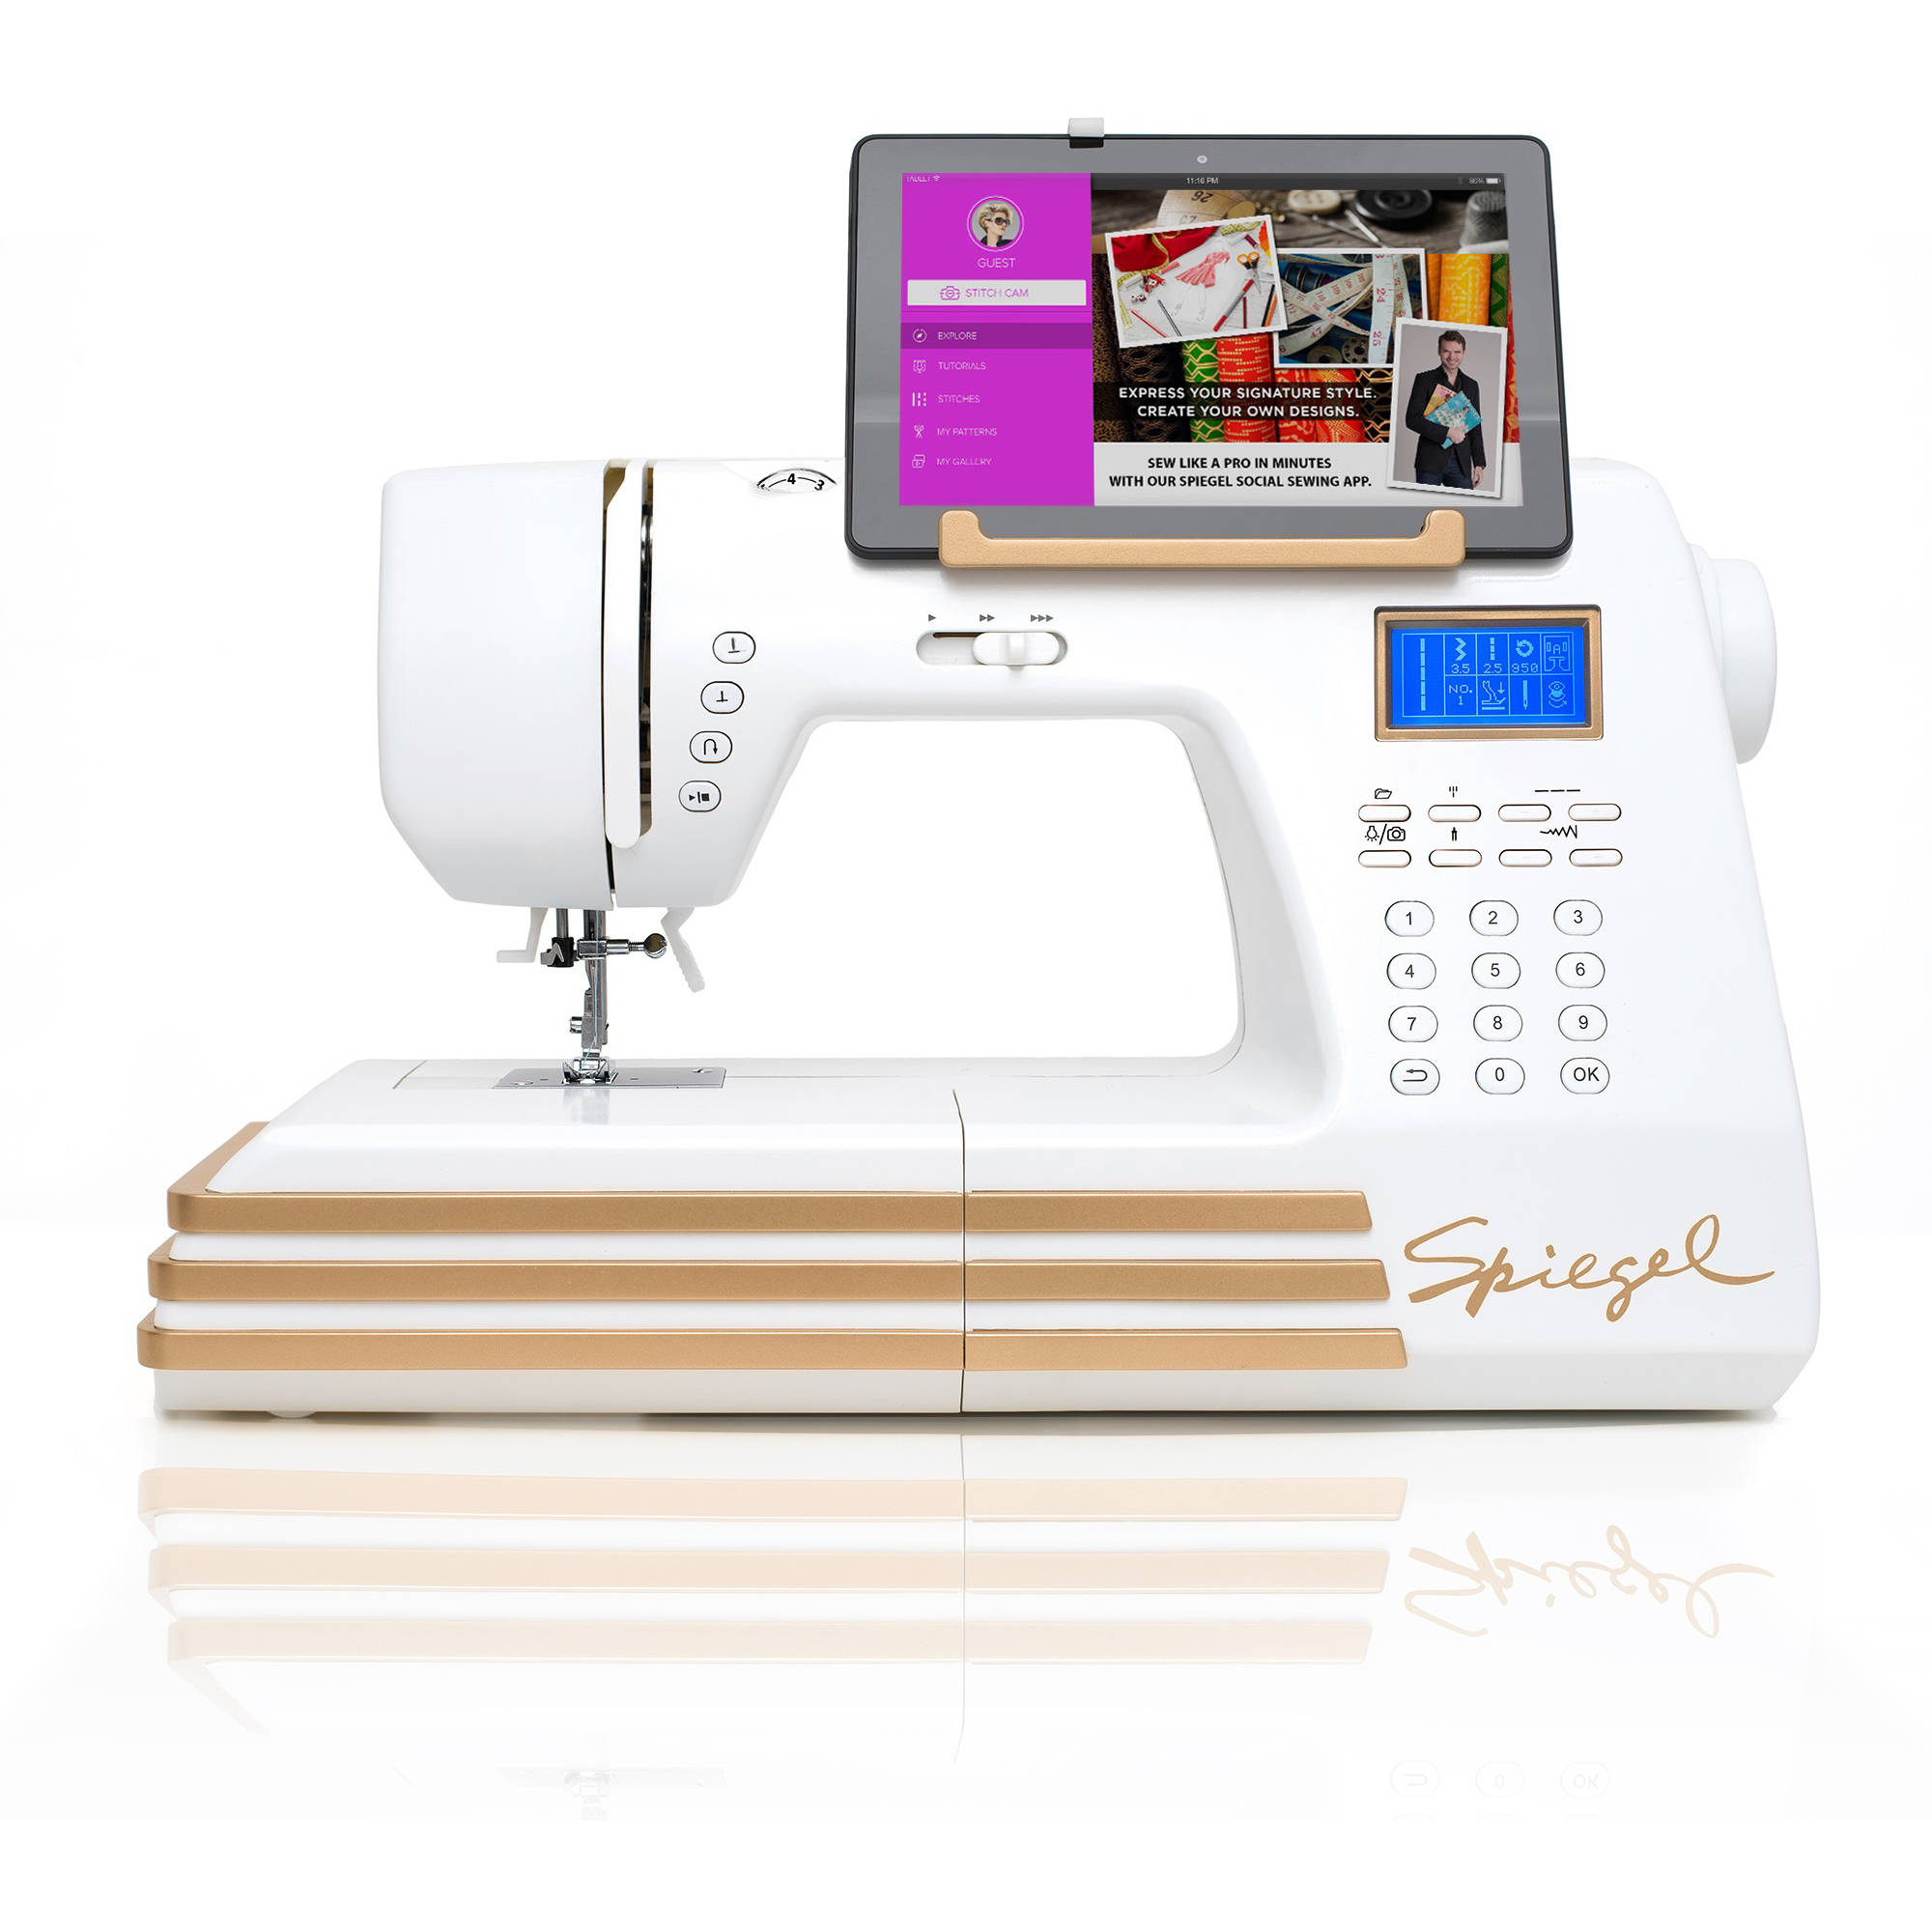 Spiegel 60609 Computerized Sewing Machine - image 3 of 6